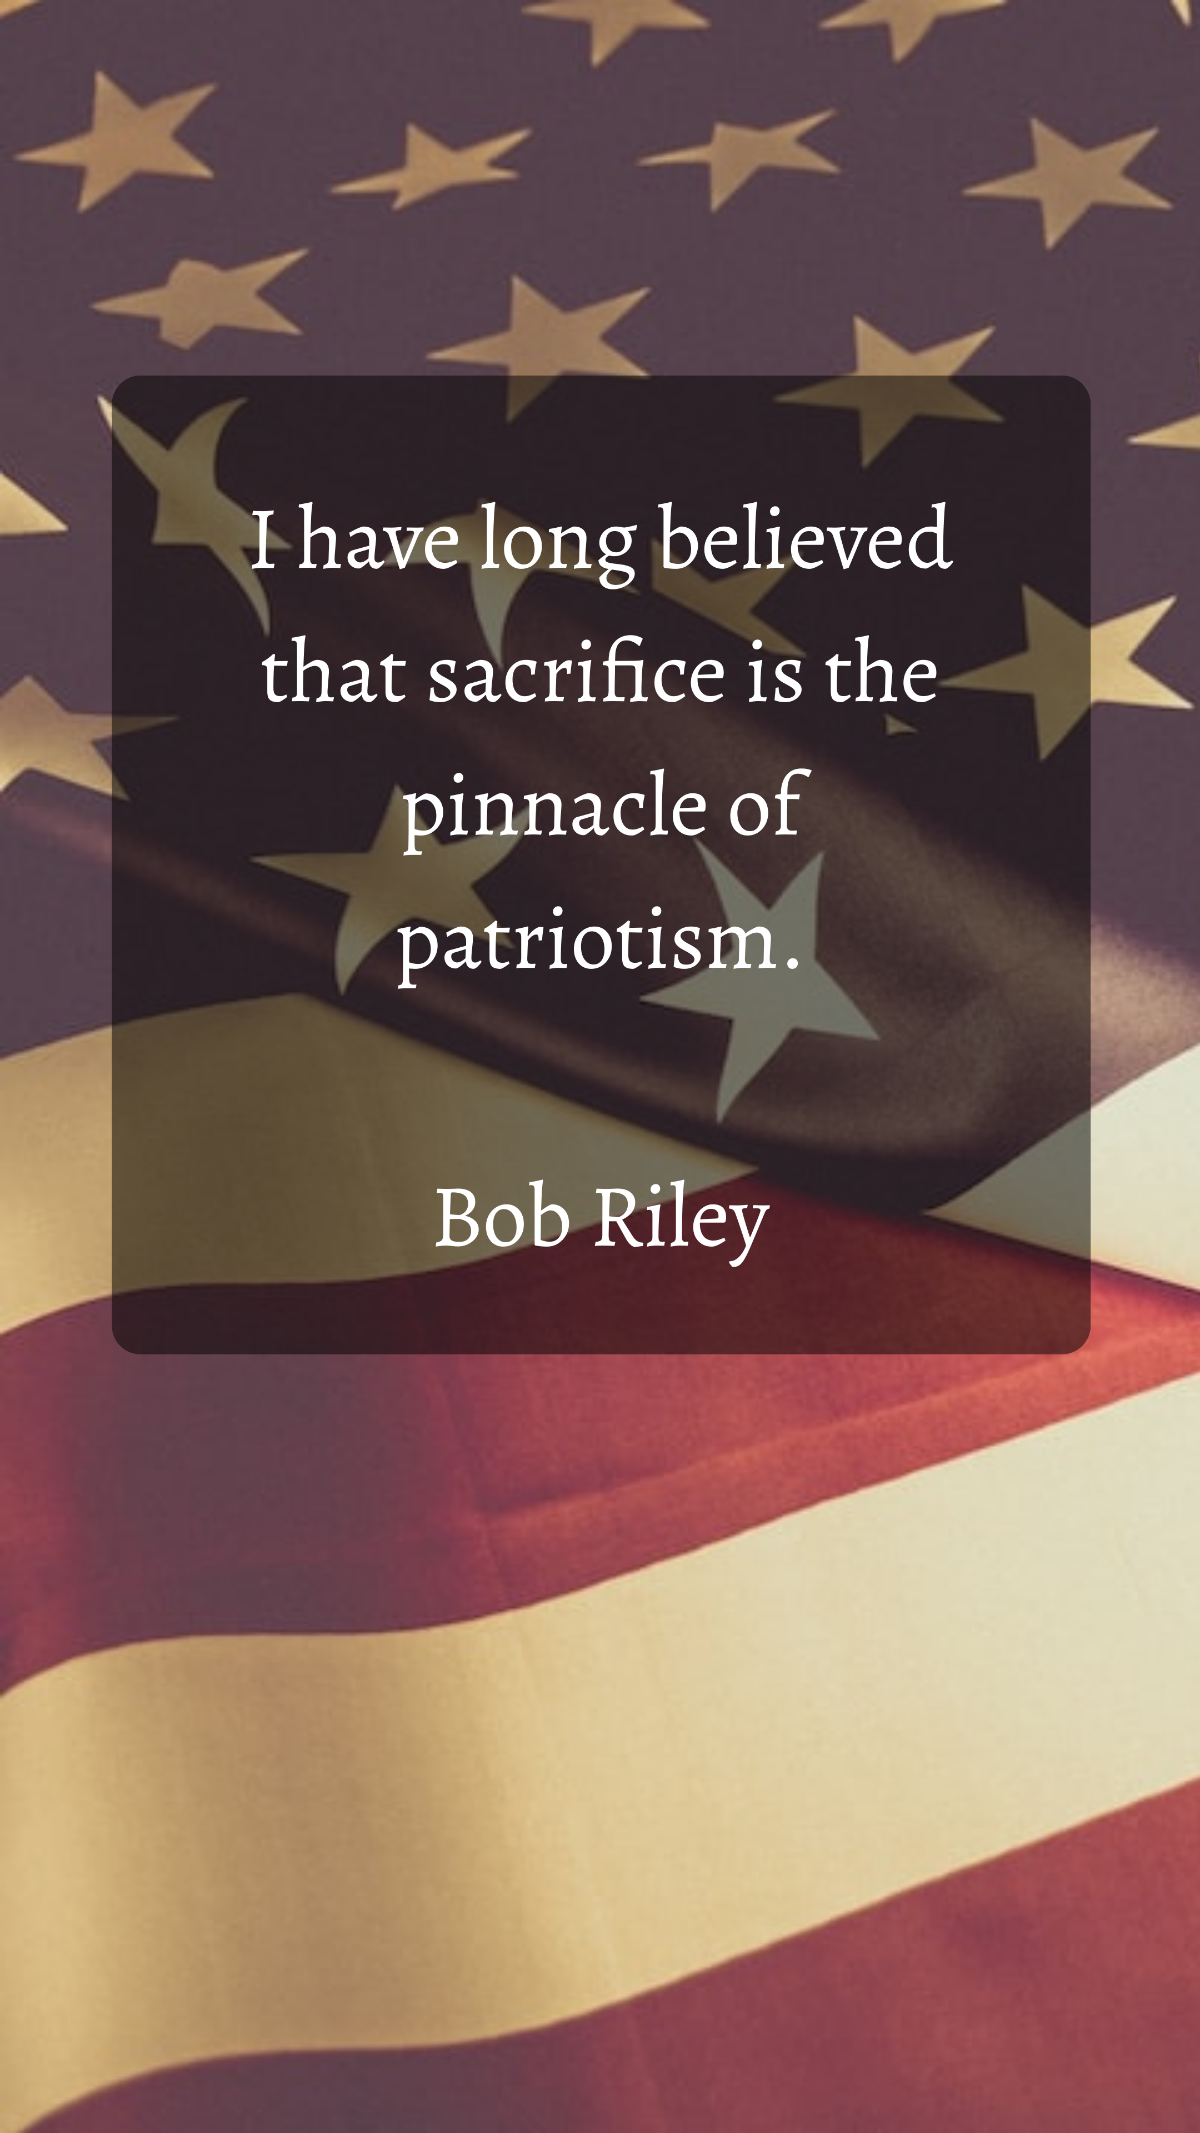 Bob Riley - I have long believed that sacrifice is the pinnacle of patriotism.